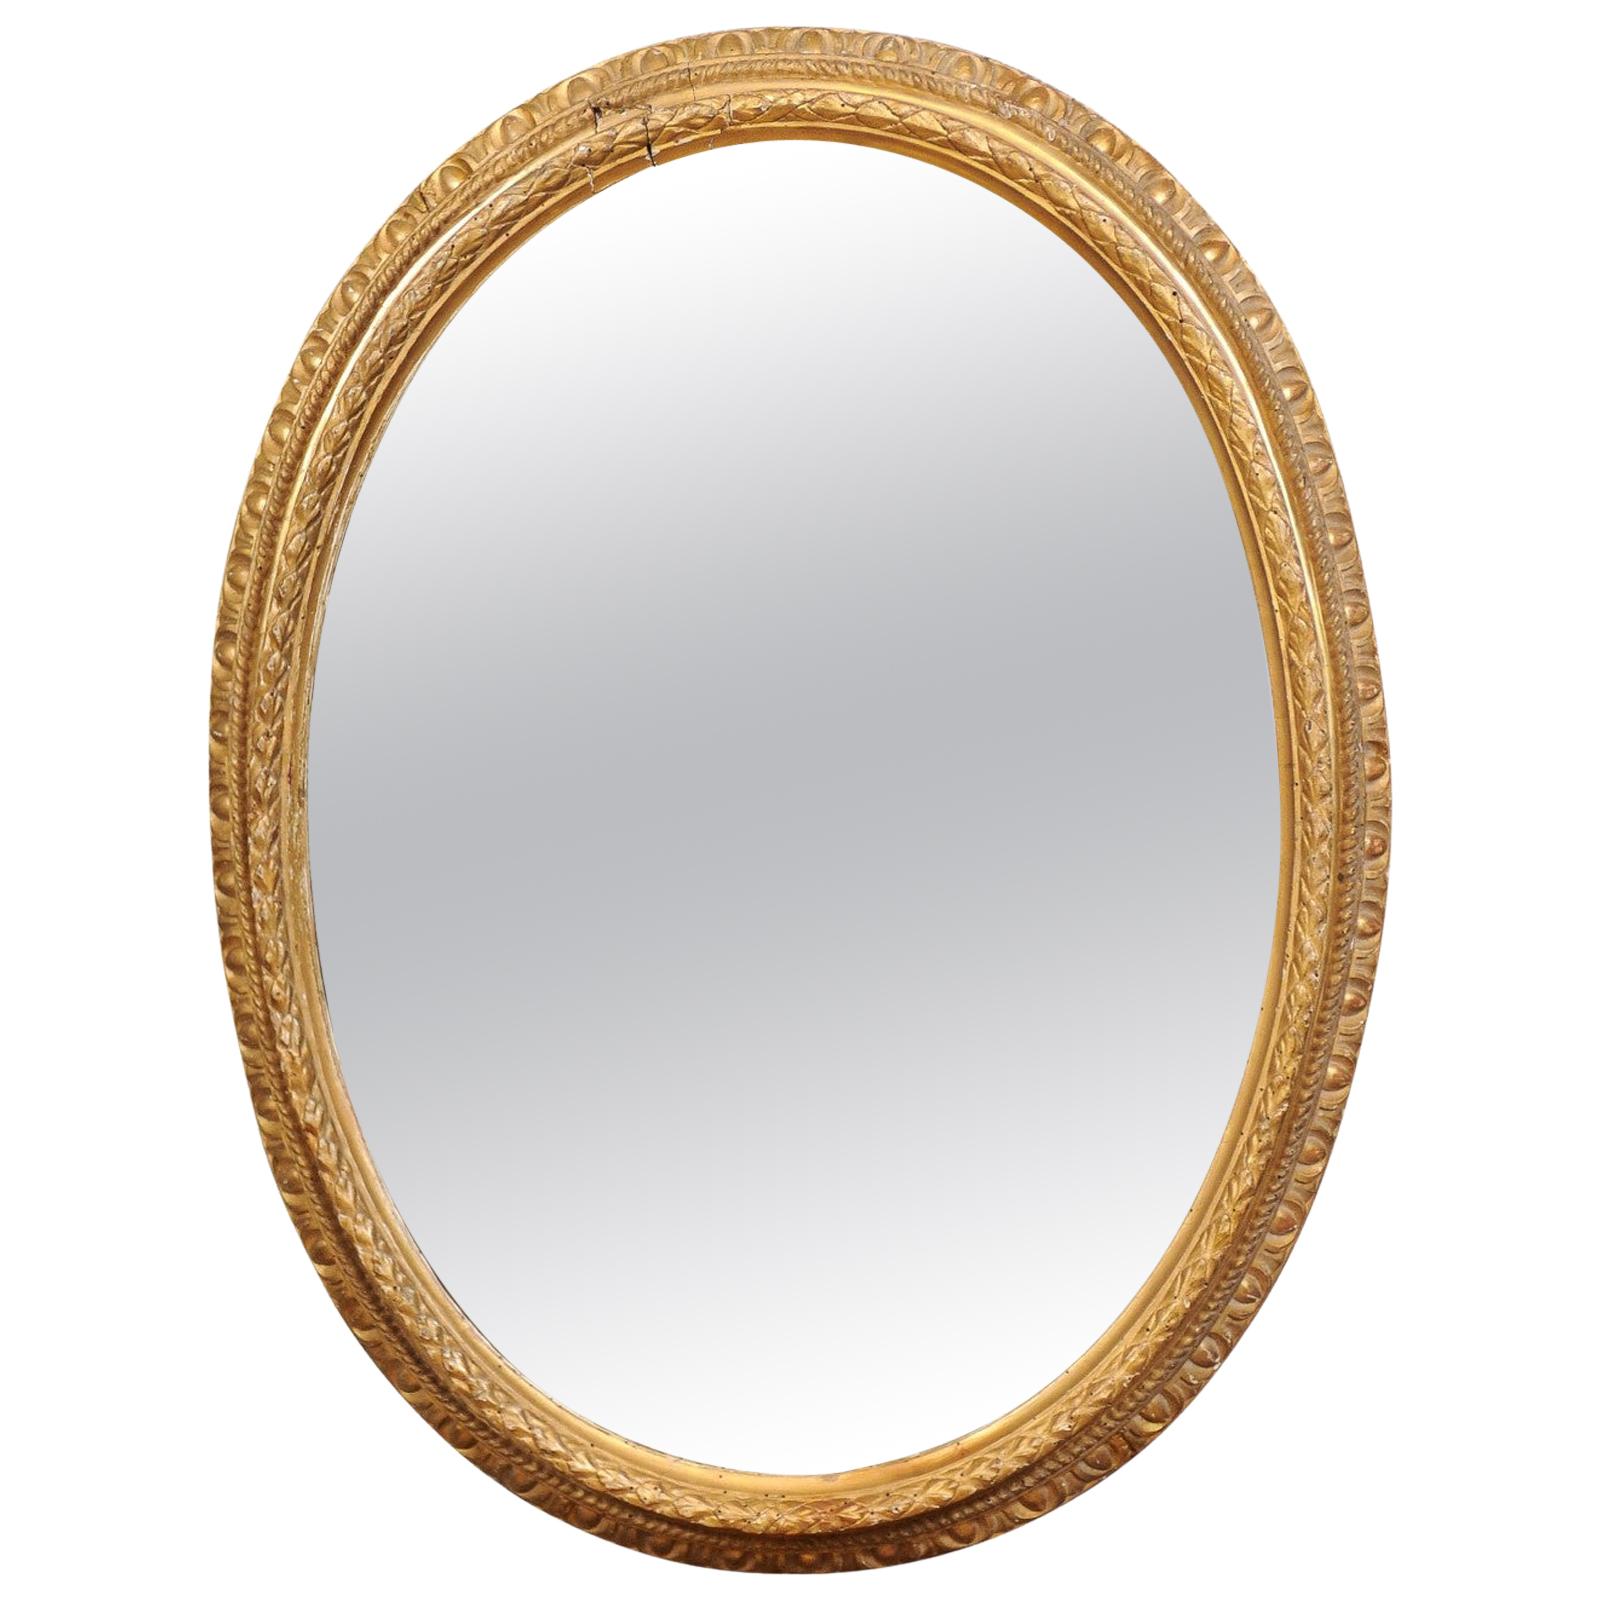 French Louis XVI Oval Giltwood Mirror, Late 18th Century